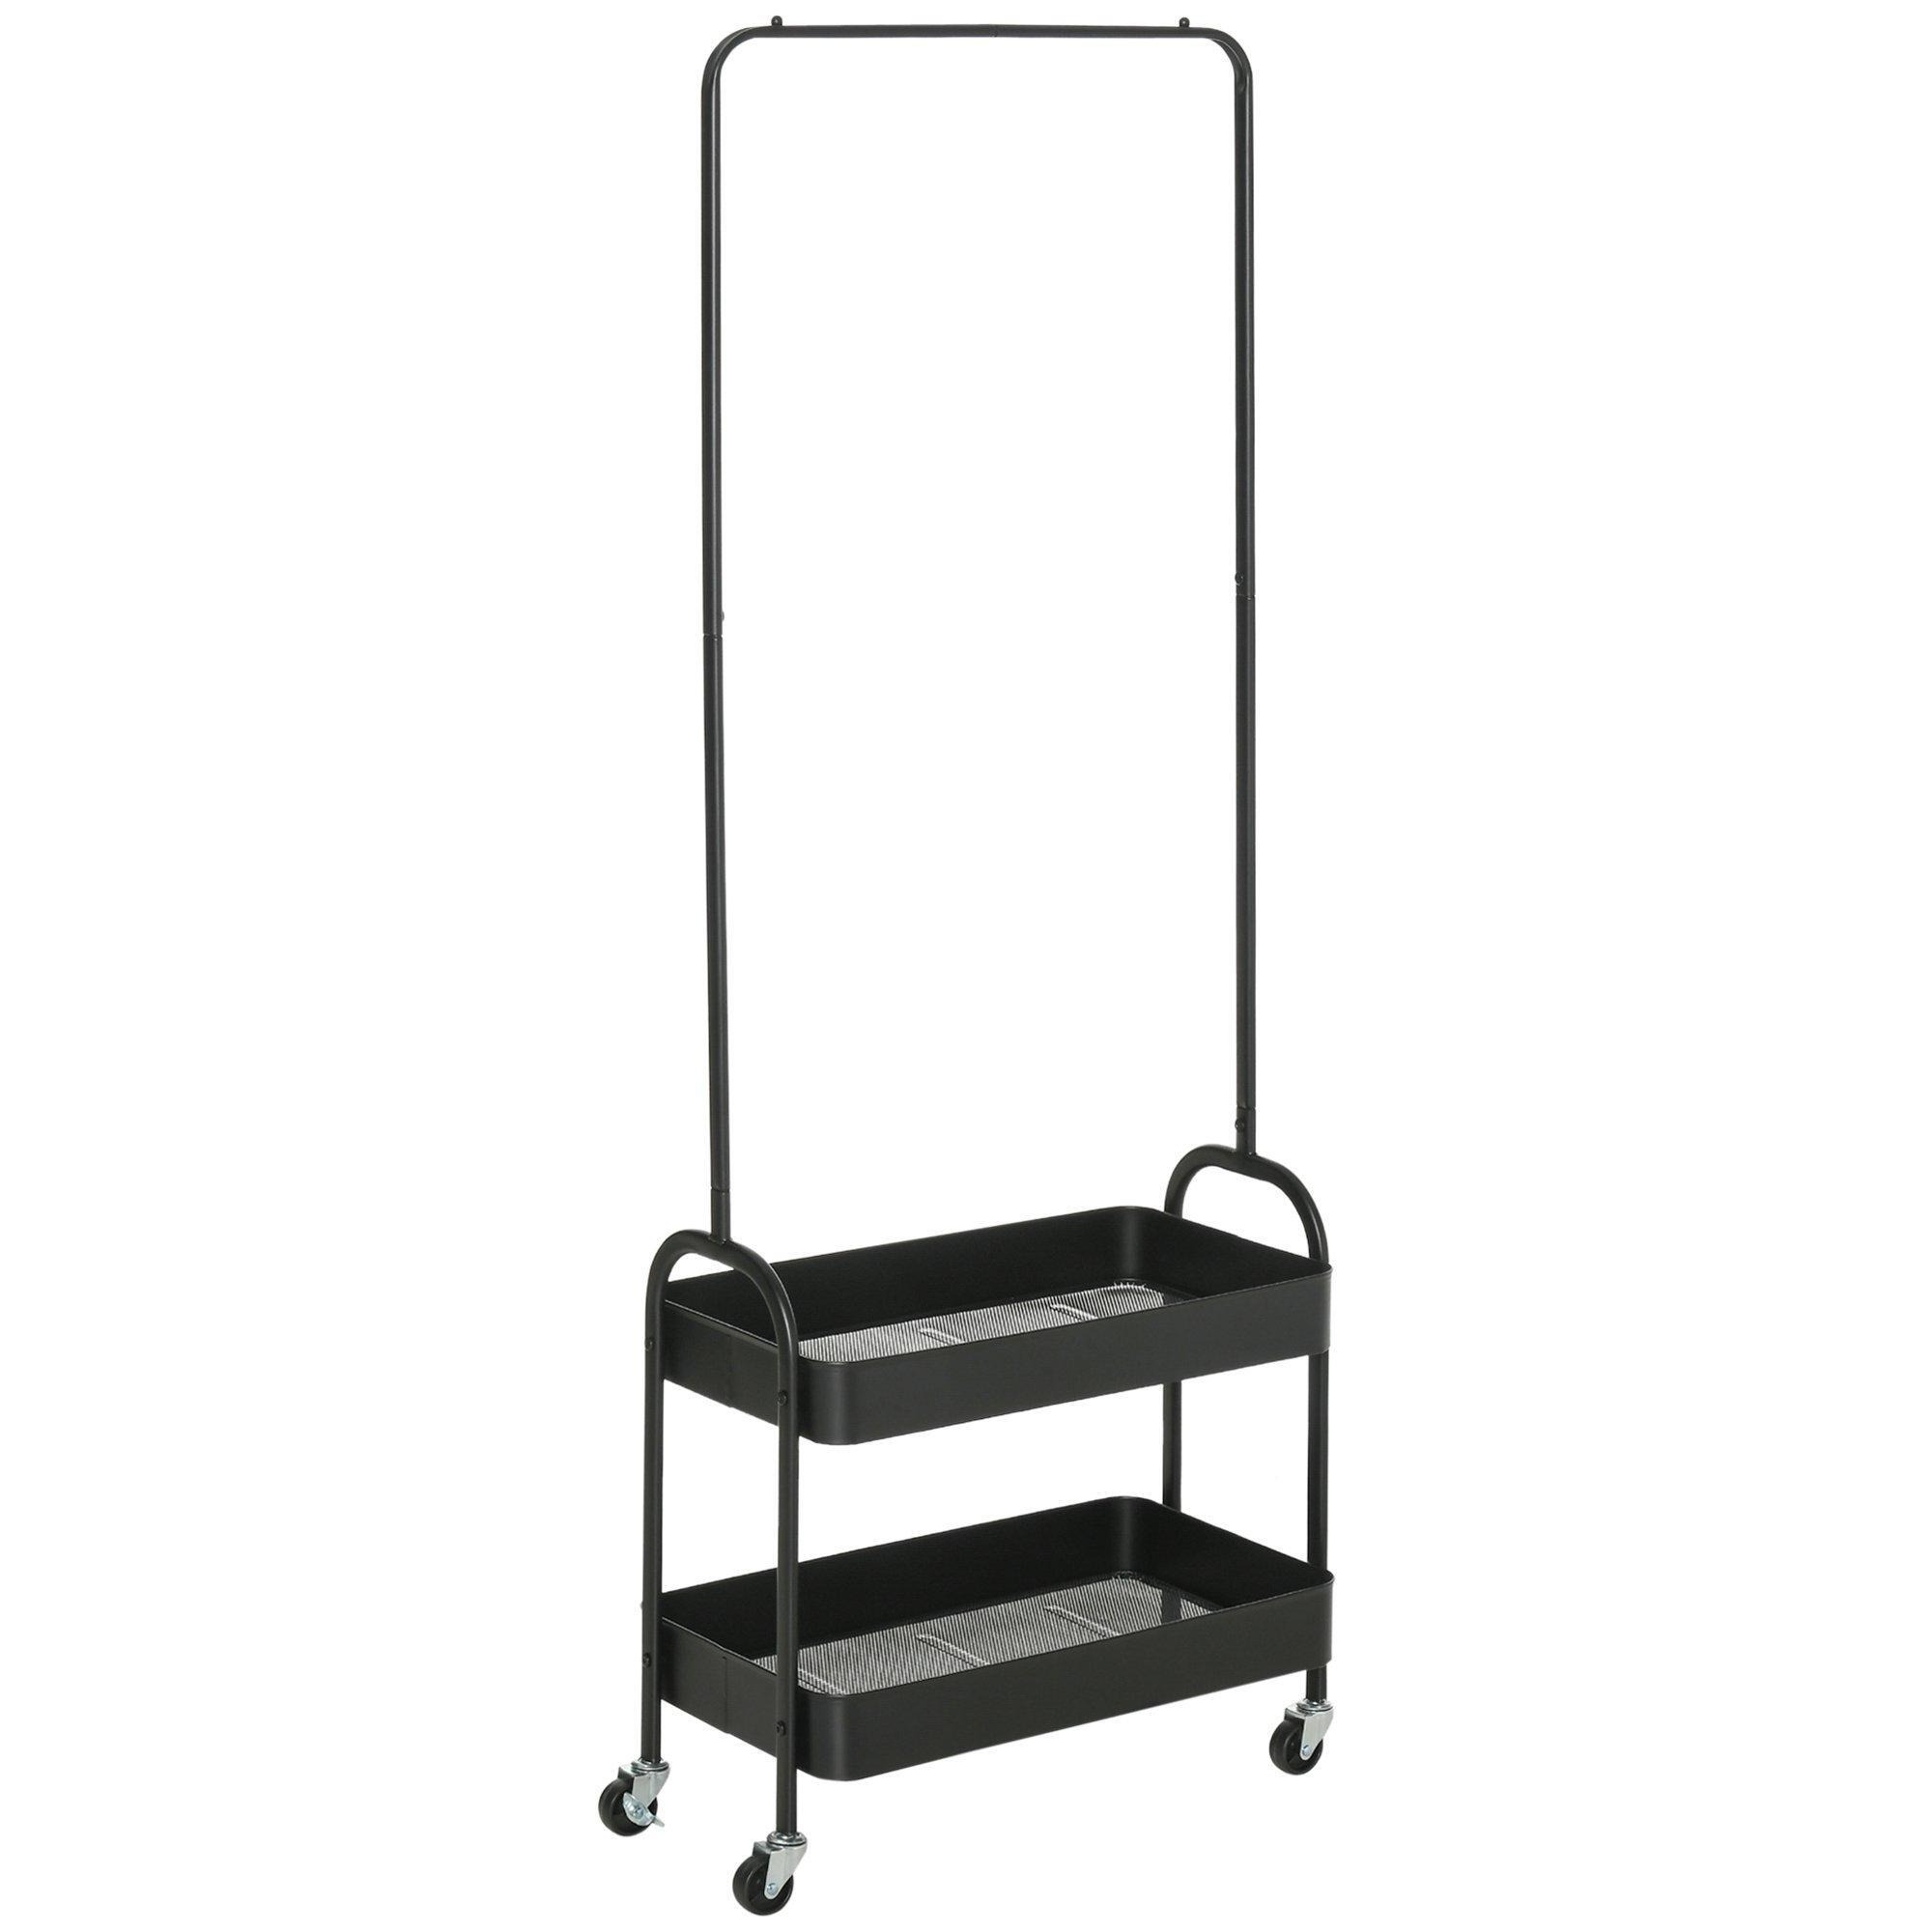 Metal Coat Rack with Shoe Storge, Clothes Hanging Stand - image 1